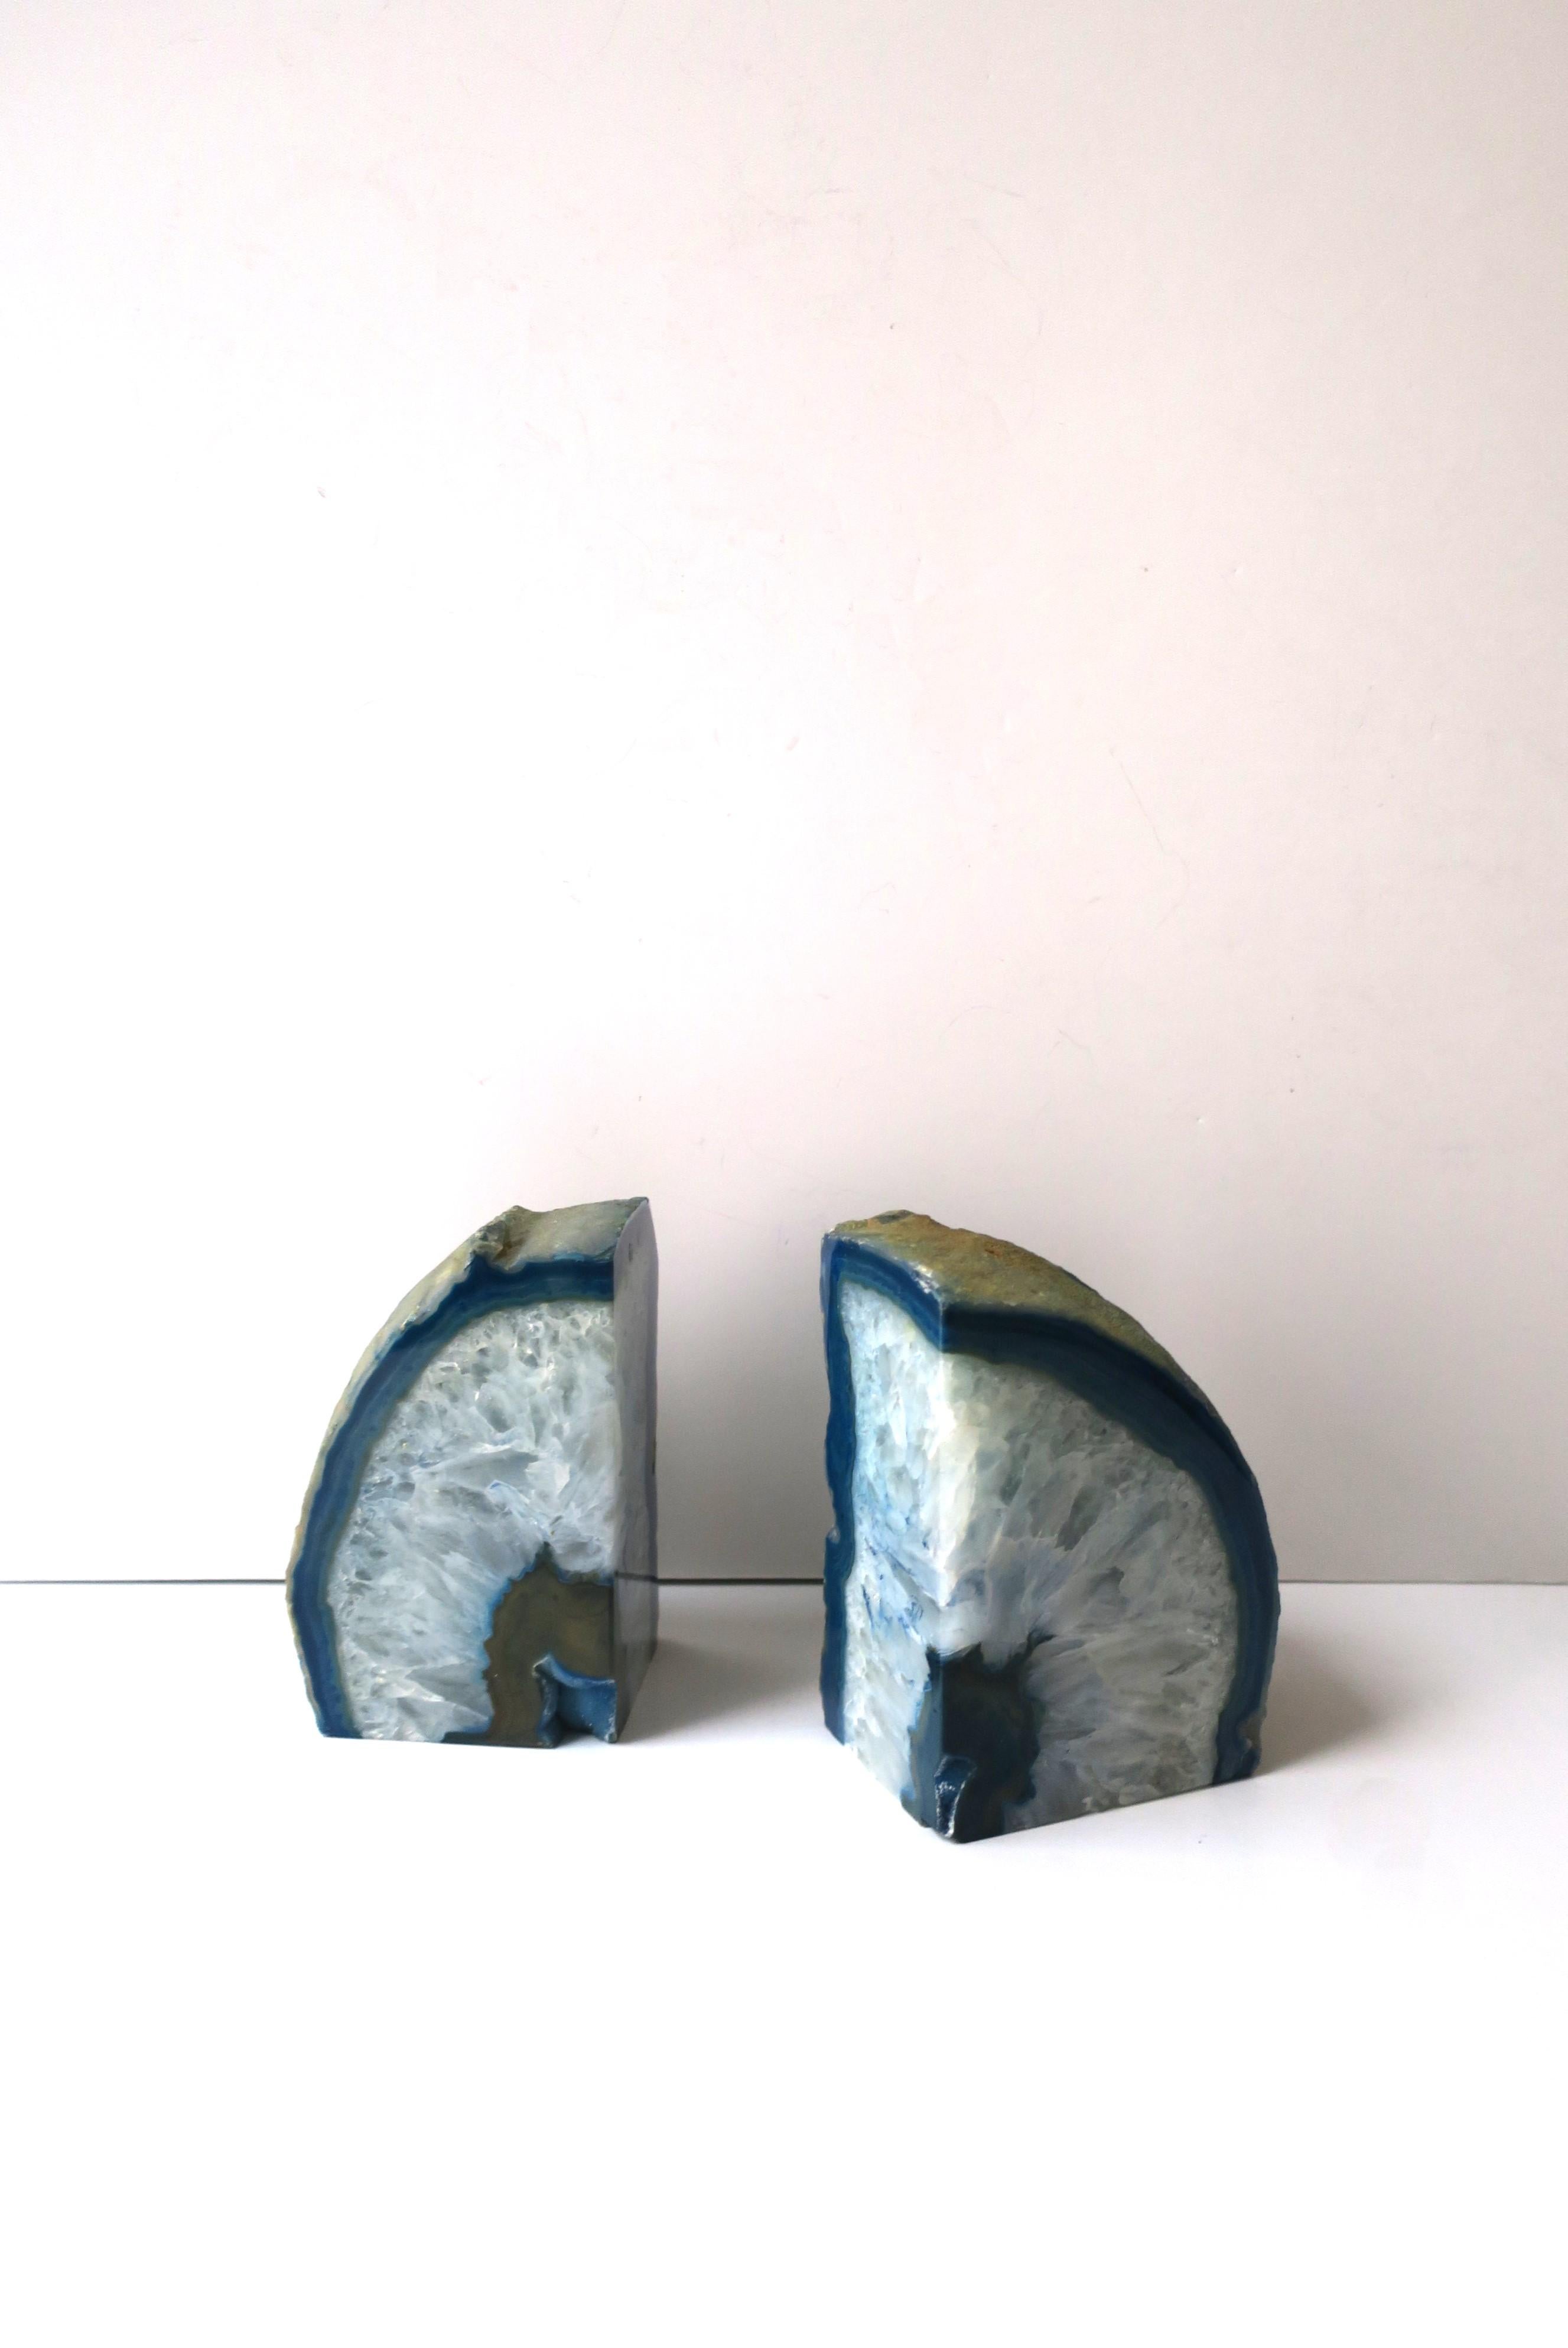 A substantial pair of blue and white quartz geode specimen bookends or decorative objects, circa late-20th century. A great pair for an office, a library, on a bookshelf, or as standalone decorative objects on top of books, on a large coffee table,